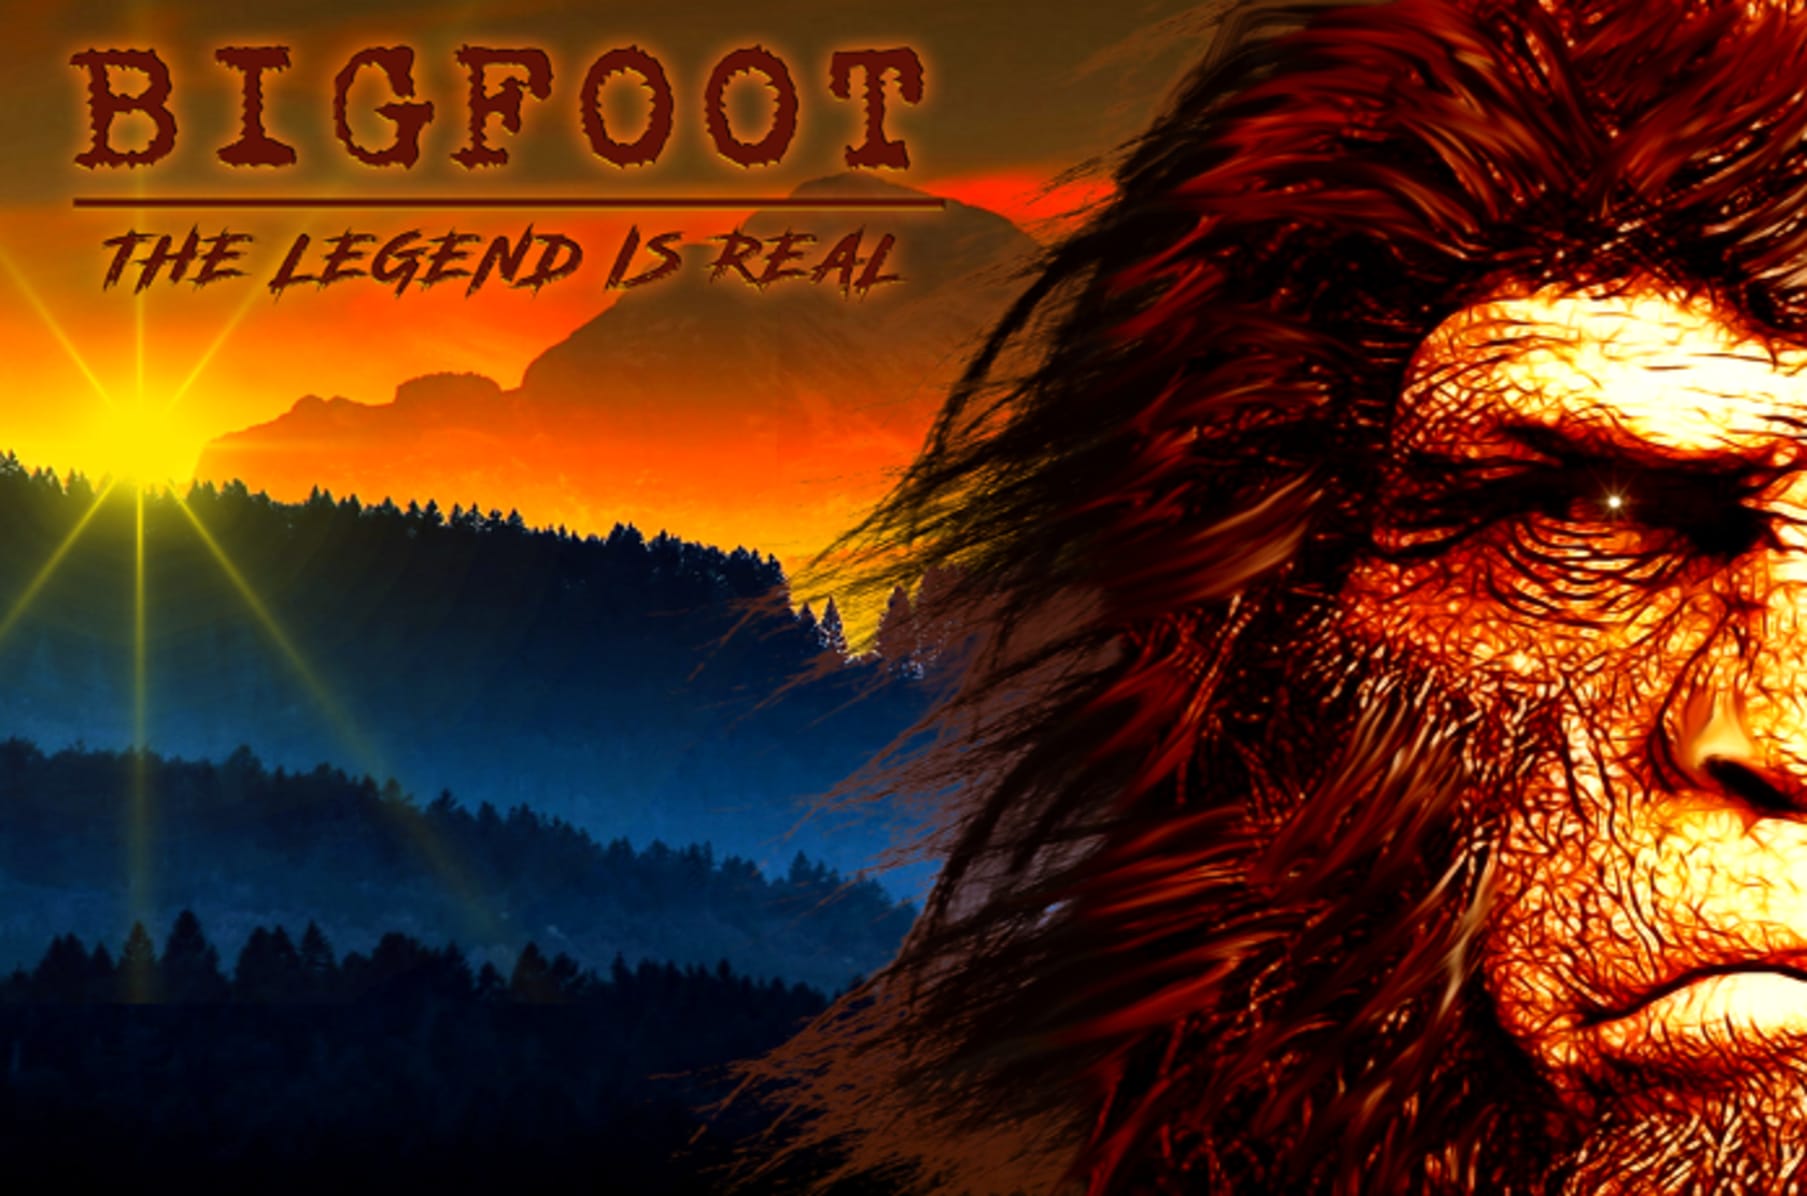 Bigfoot:The Legend is real Documentary | Indiegogo